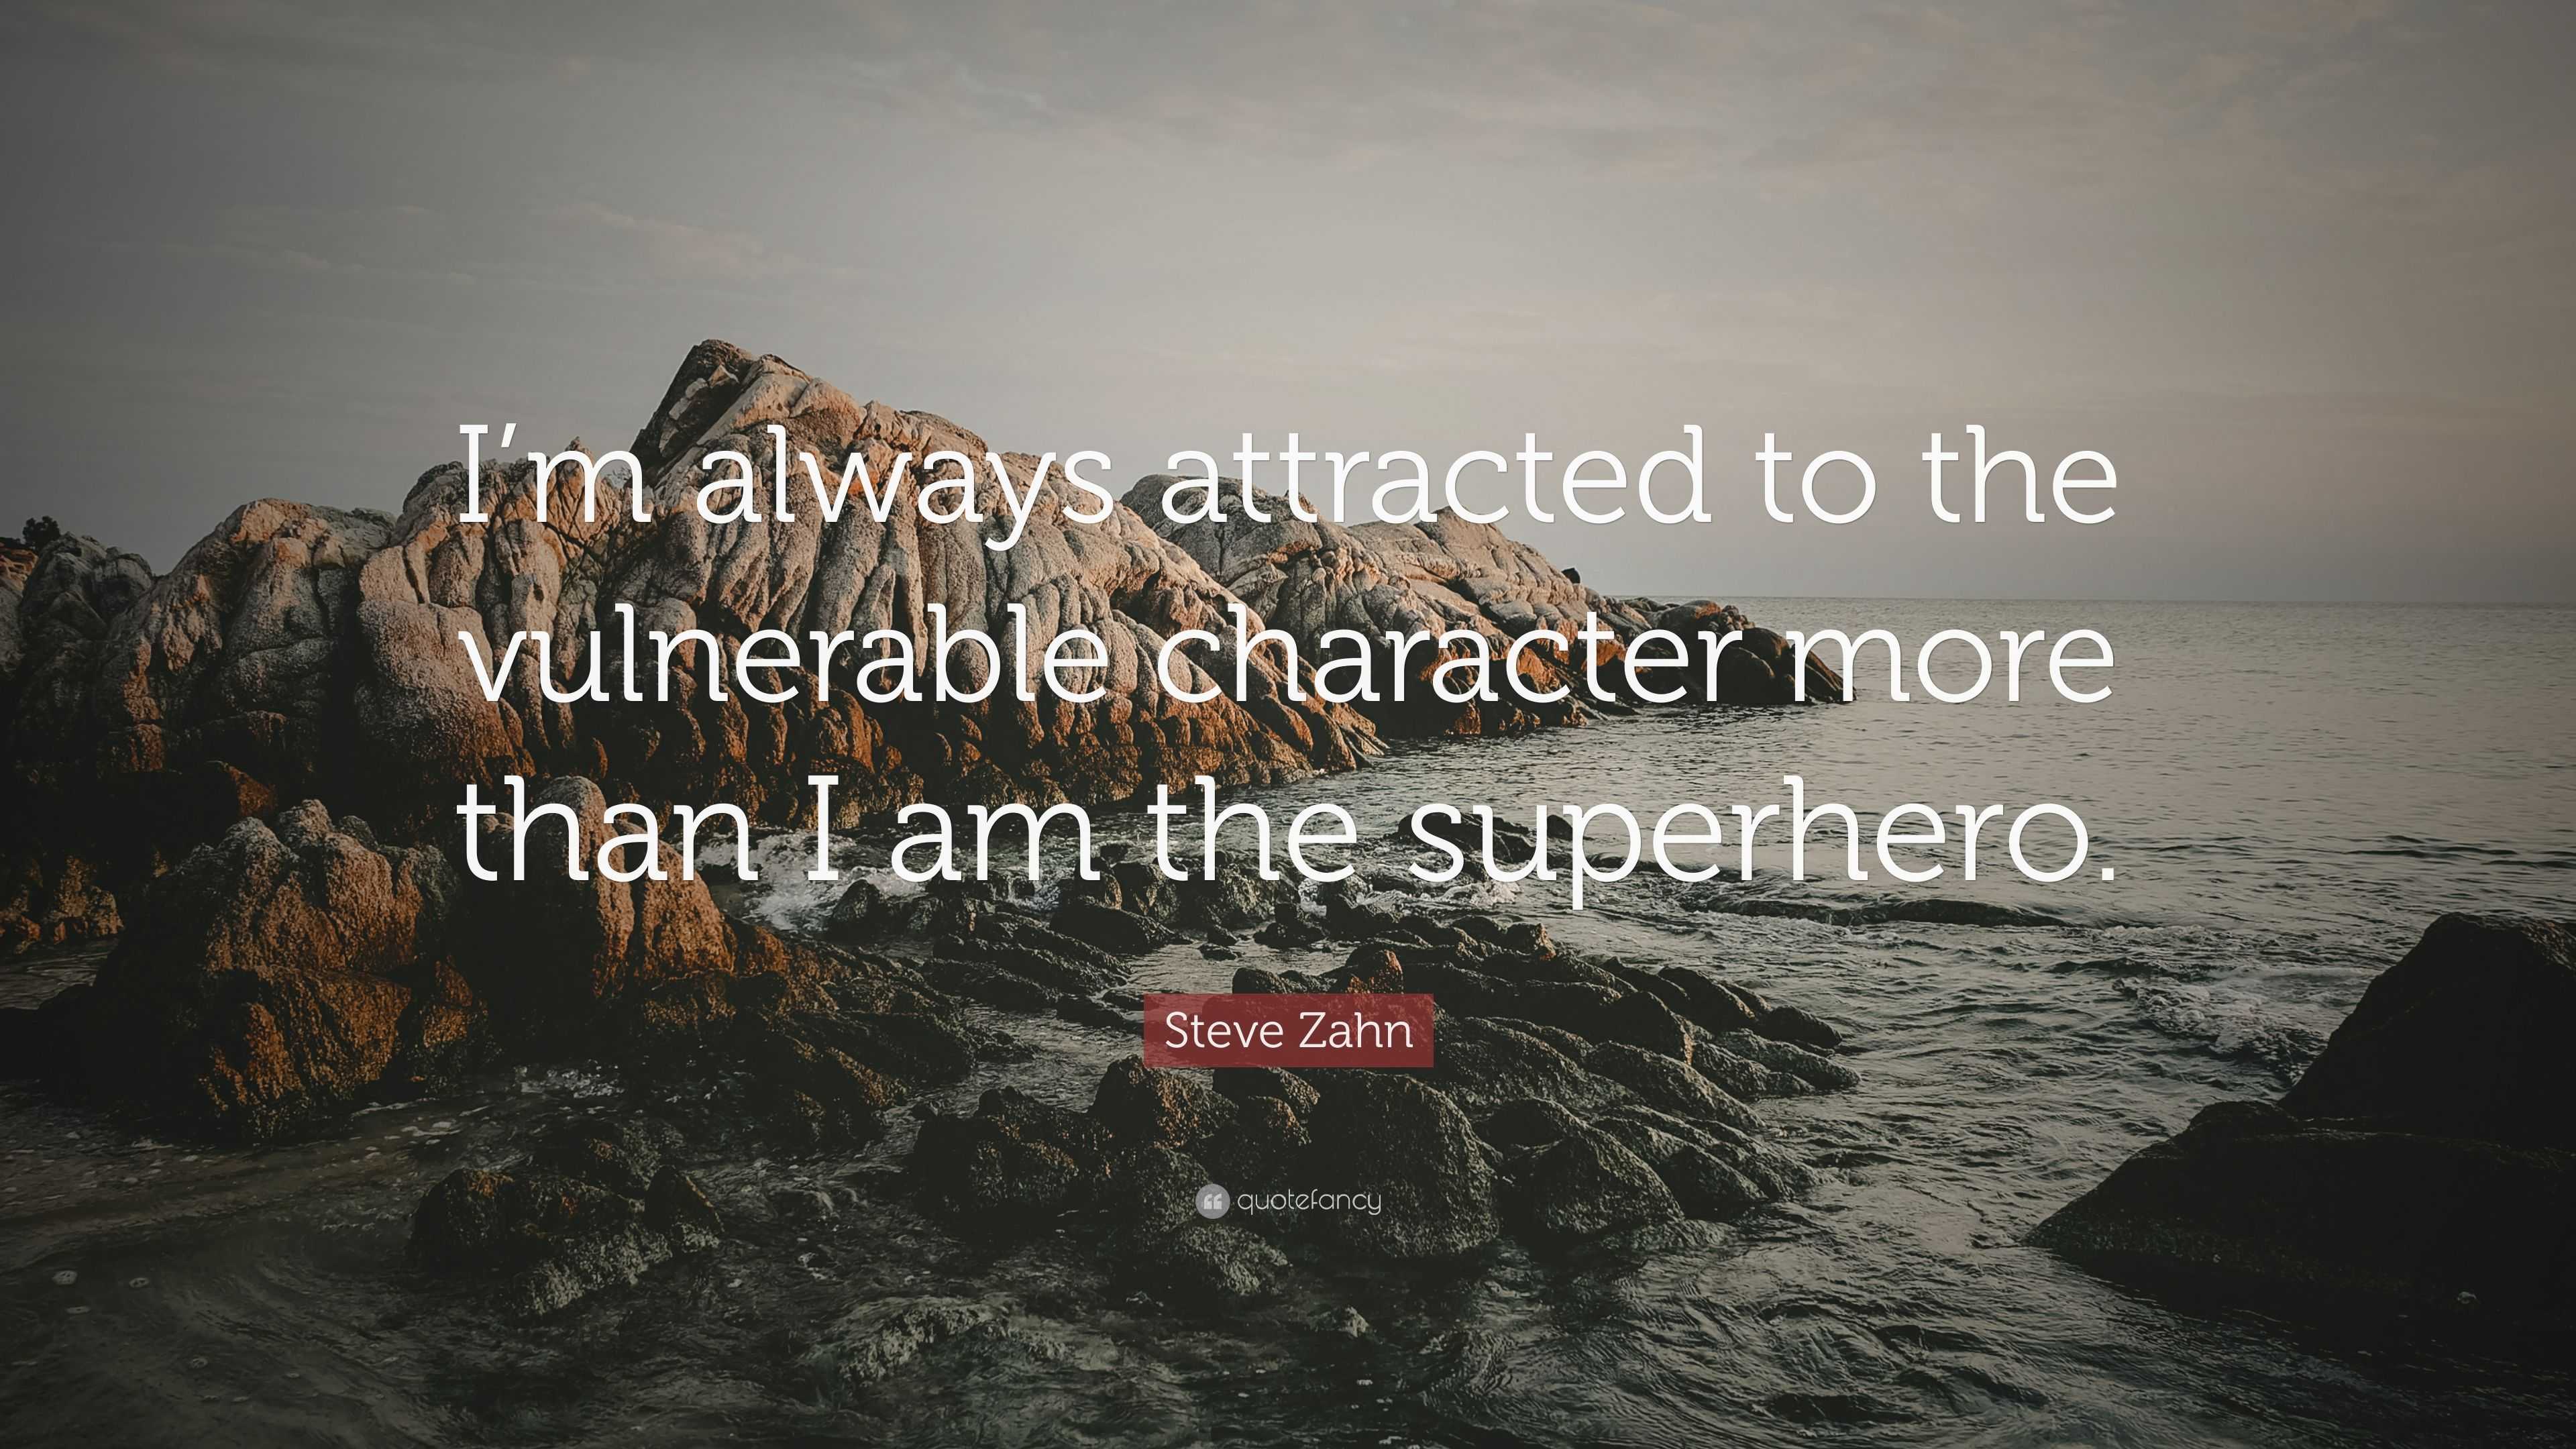 Steve Zahn Quote: “I’m always attracted to the vulnerable character ...